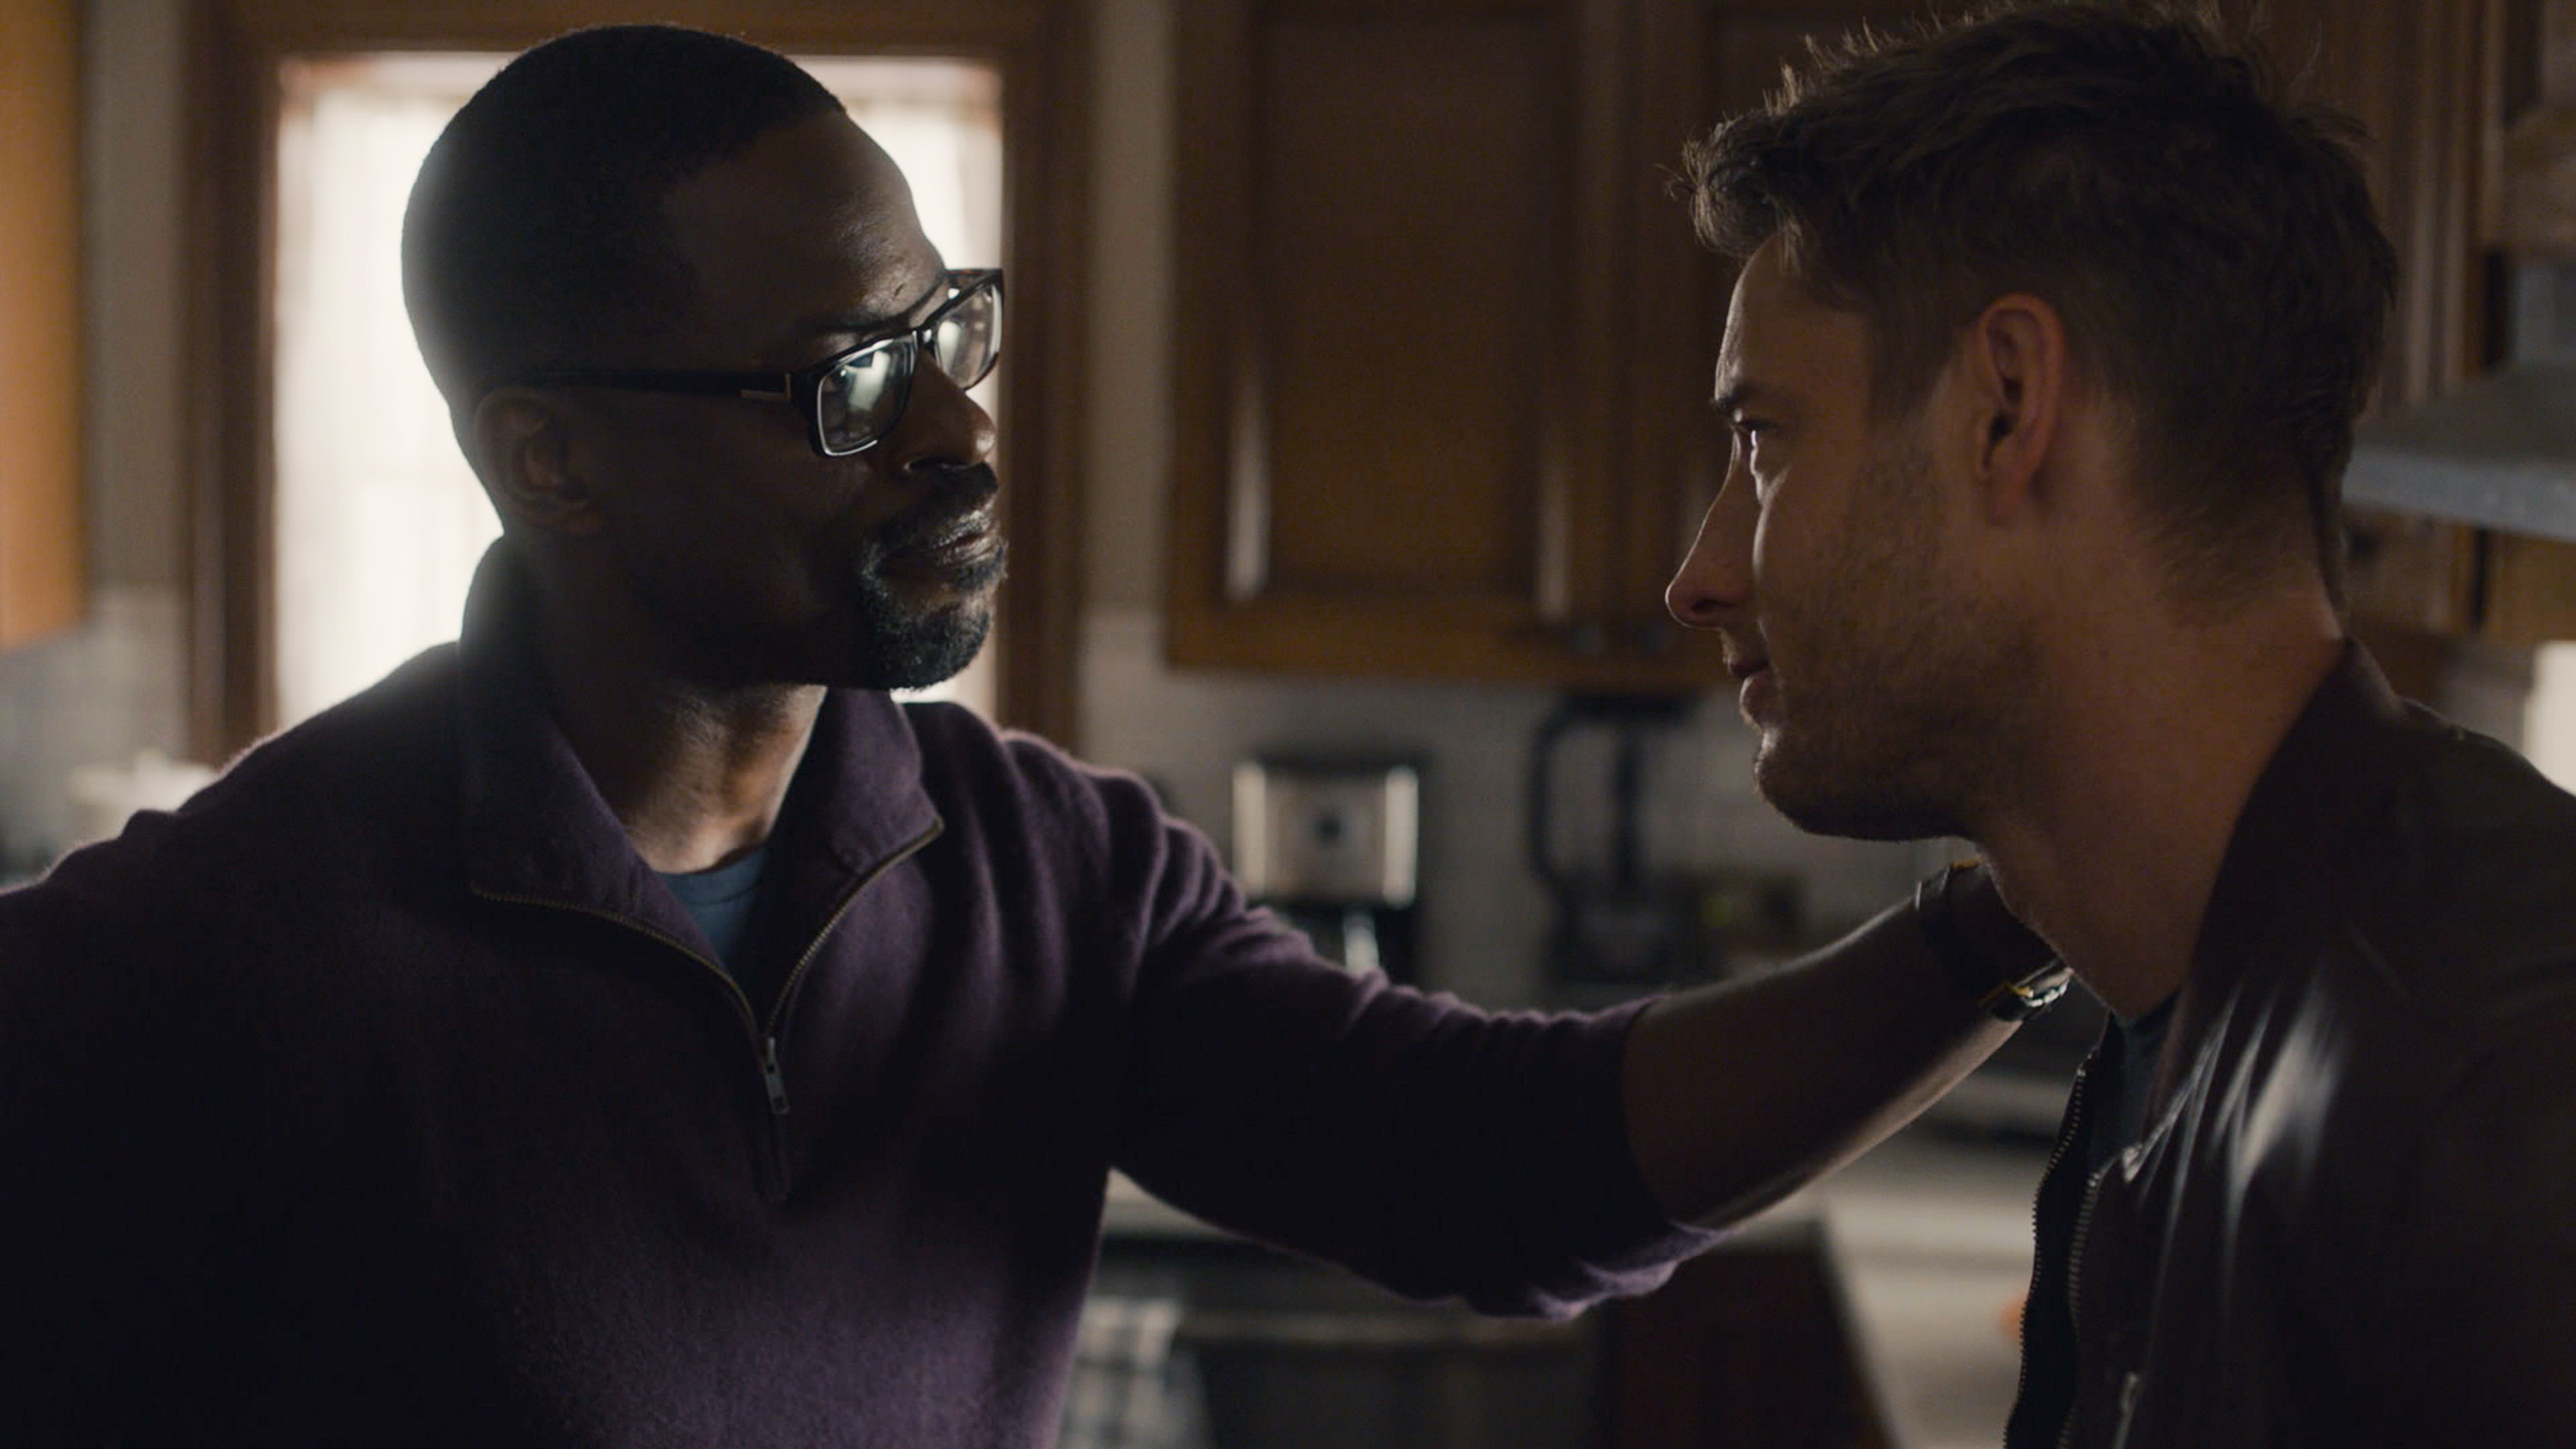 'This Is Us' Season 6 stars Sterling K. Brown and Justin Hartley, in character as Randall and Kevin, talk. Randall, wearing a purple sweater, puts his hand on Kevin's shoulder, who is wearing a dark brown jacket.